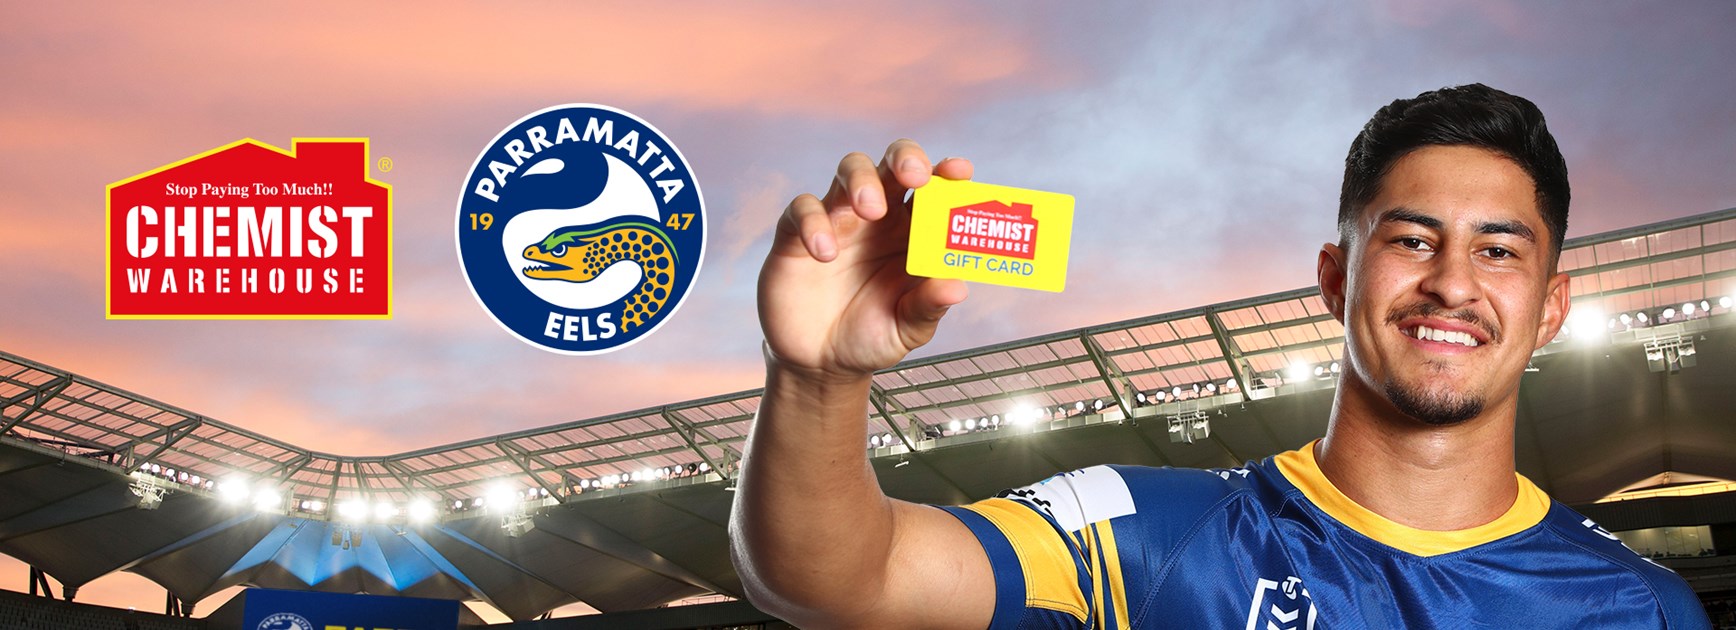 Eels sign new partner in race to Membership record